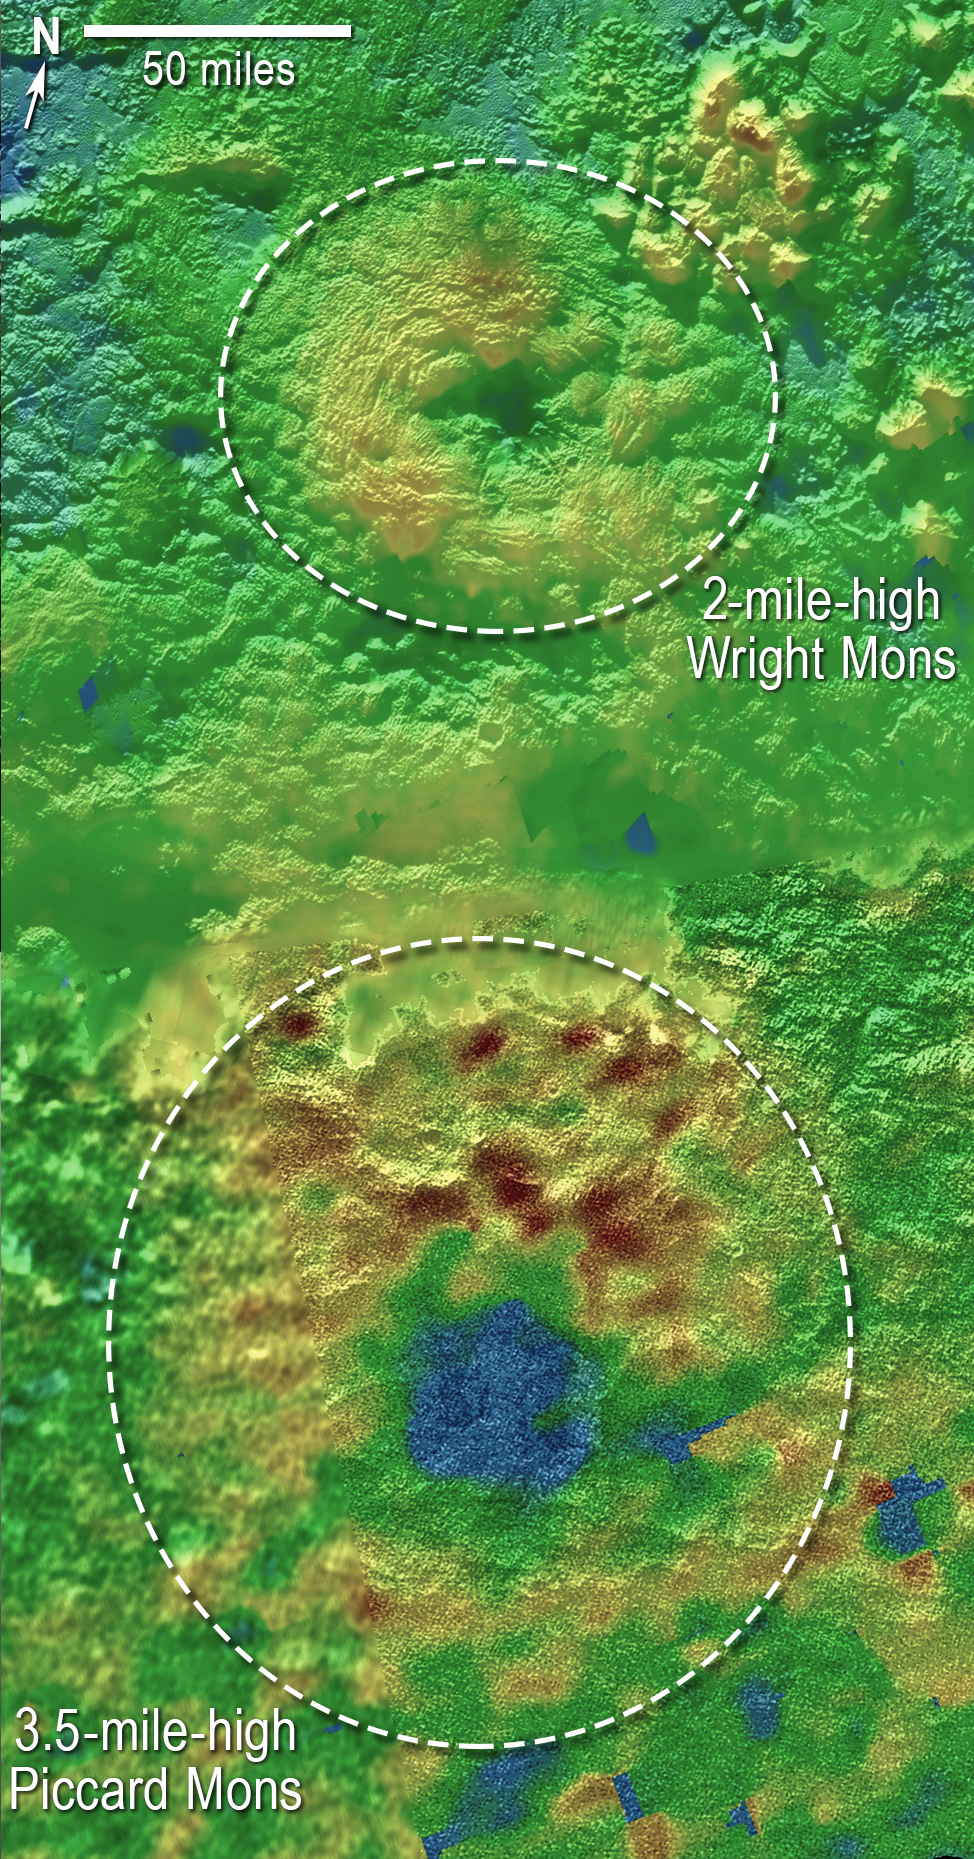 Using New Horizons images of Pluto’s surface to make 3-D topographic maps, scientists discovered that two of Pluto’s mountains, informally named Wright Mons and Piccard Mons, could be ice volcanoes. The color depicts changes in elevation, blue indicating lower terrain and brown showing higher elevation. Green terrains are at intermediate heights. Image credit: NASA/JHUAPL/SwRI